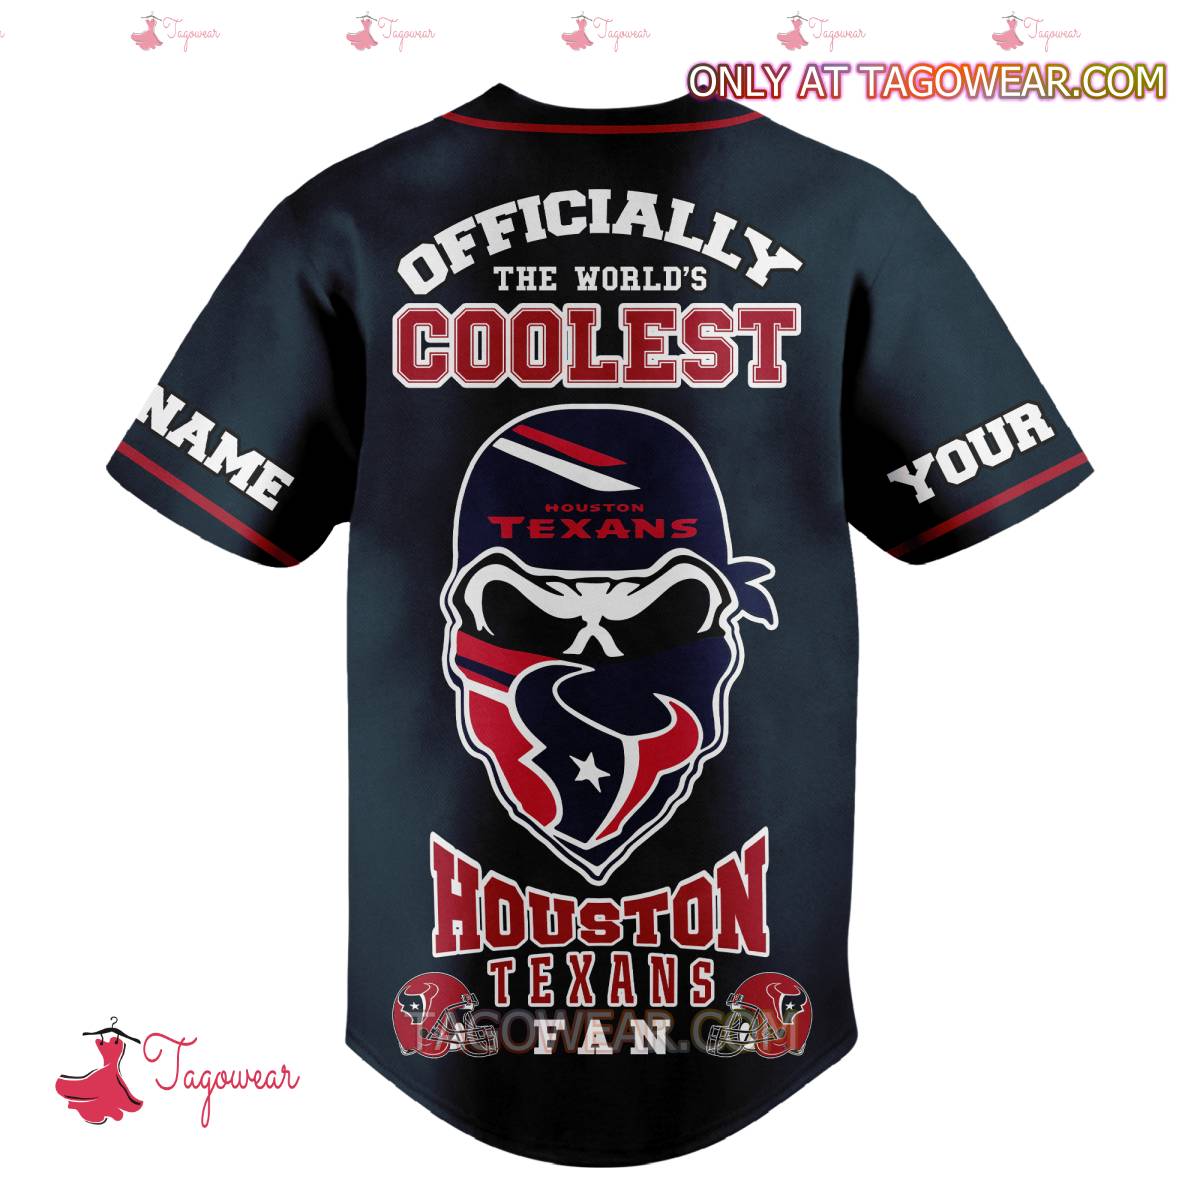 Houston Texans Officially The World's Coolest Personalized Baseball Jersey b